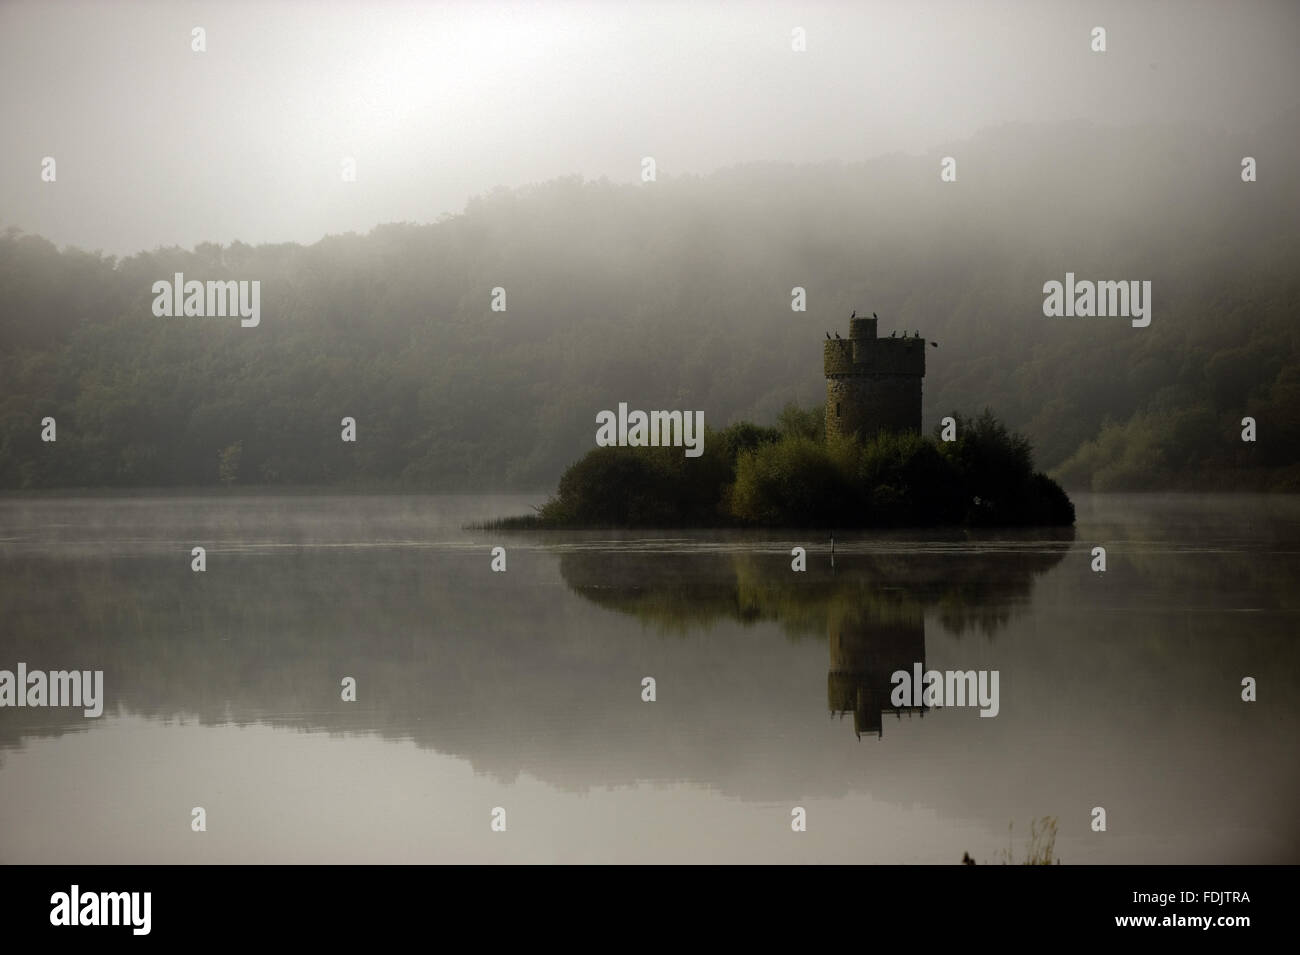 A misty view towards Crichton Tower on Gad Island in Lough Erne at Crom, Co. Fermanagh, Northern Ireland. Stock Photo